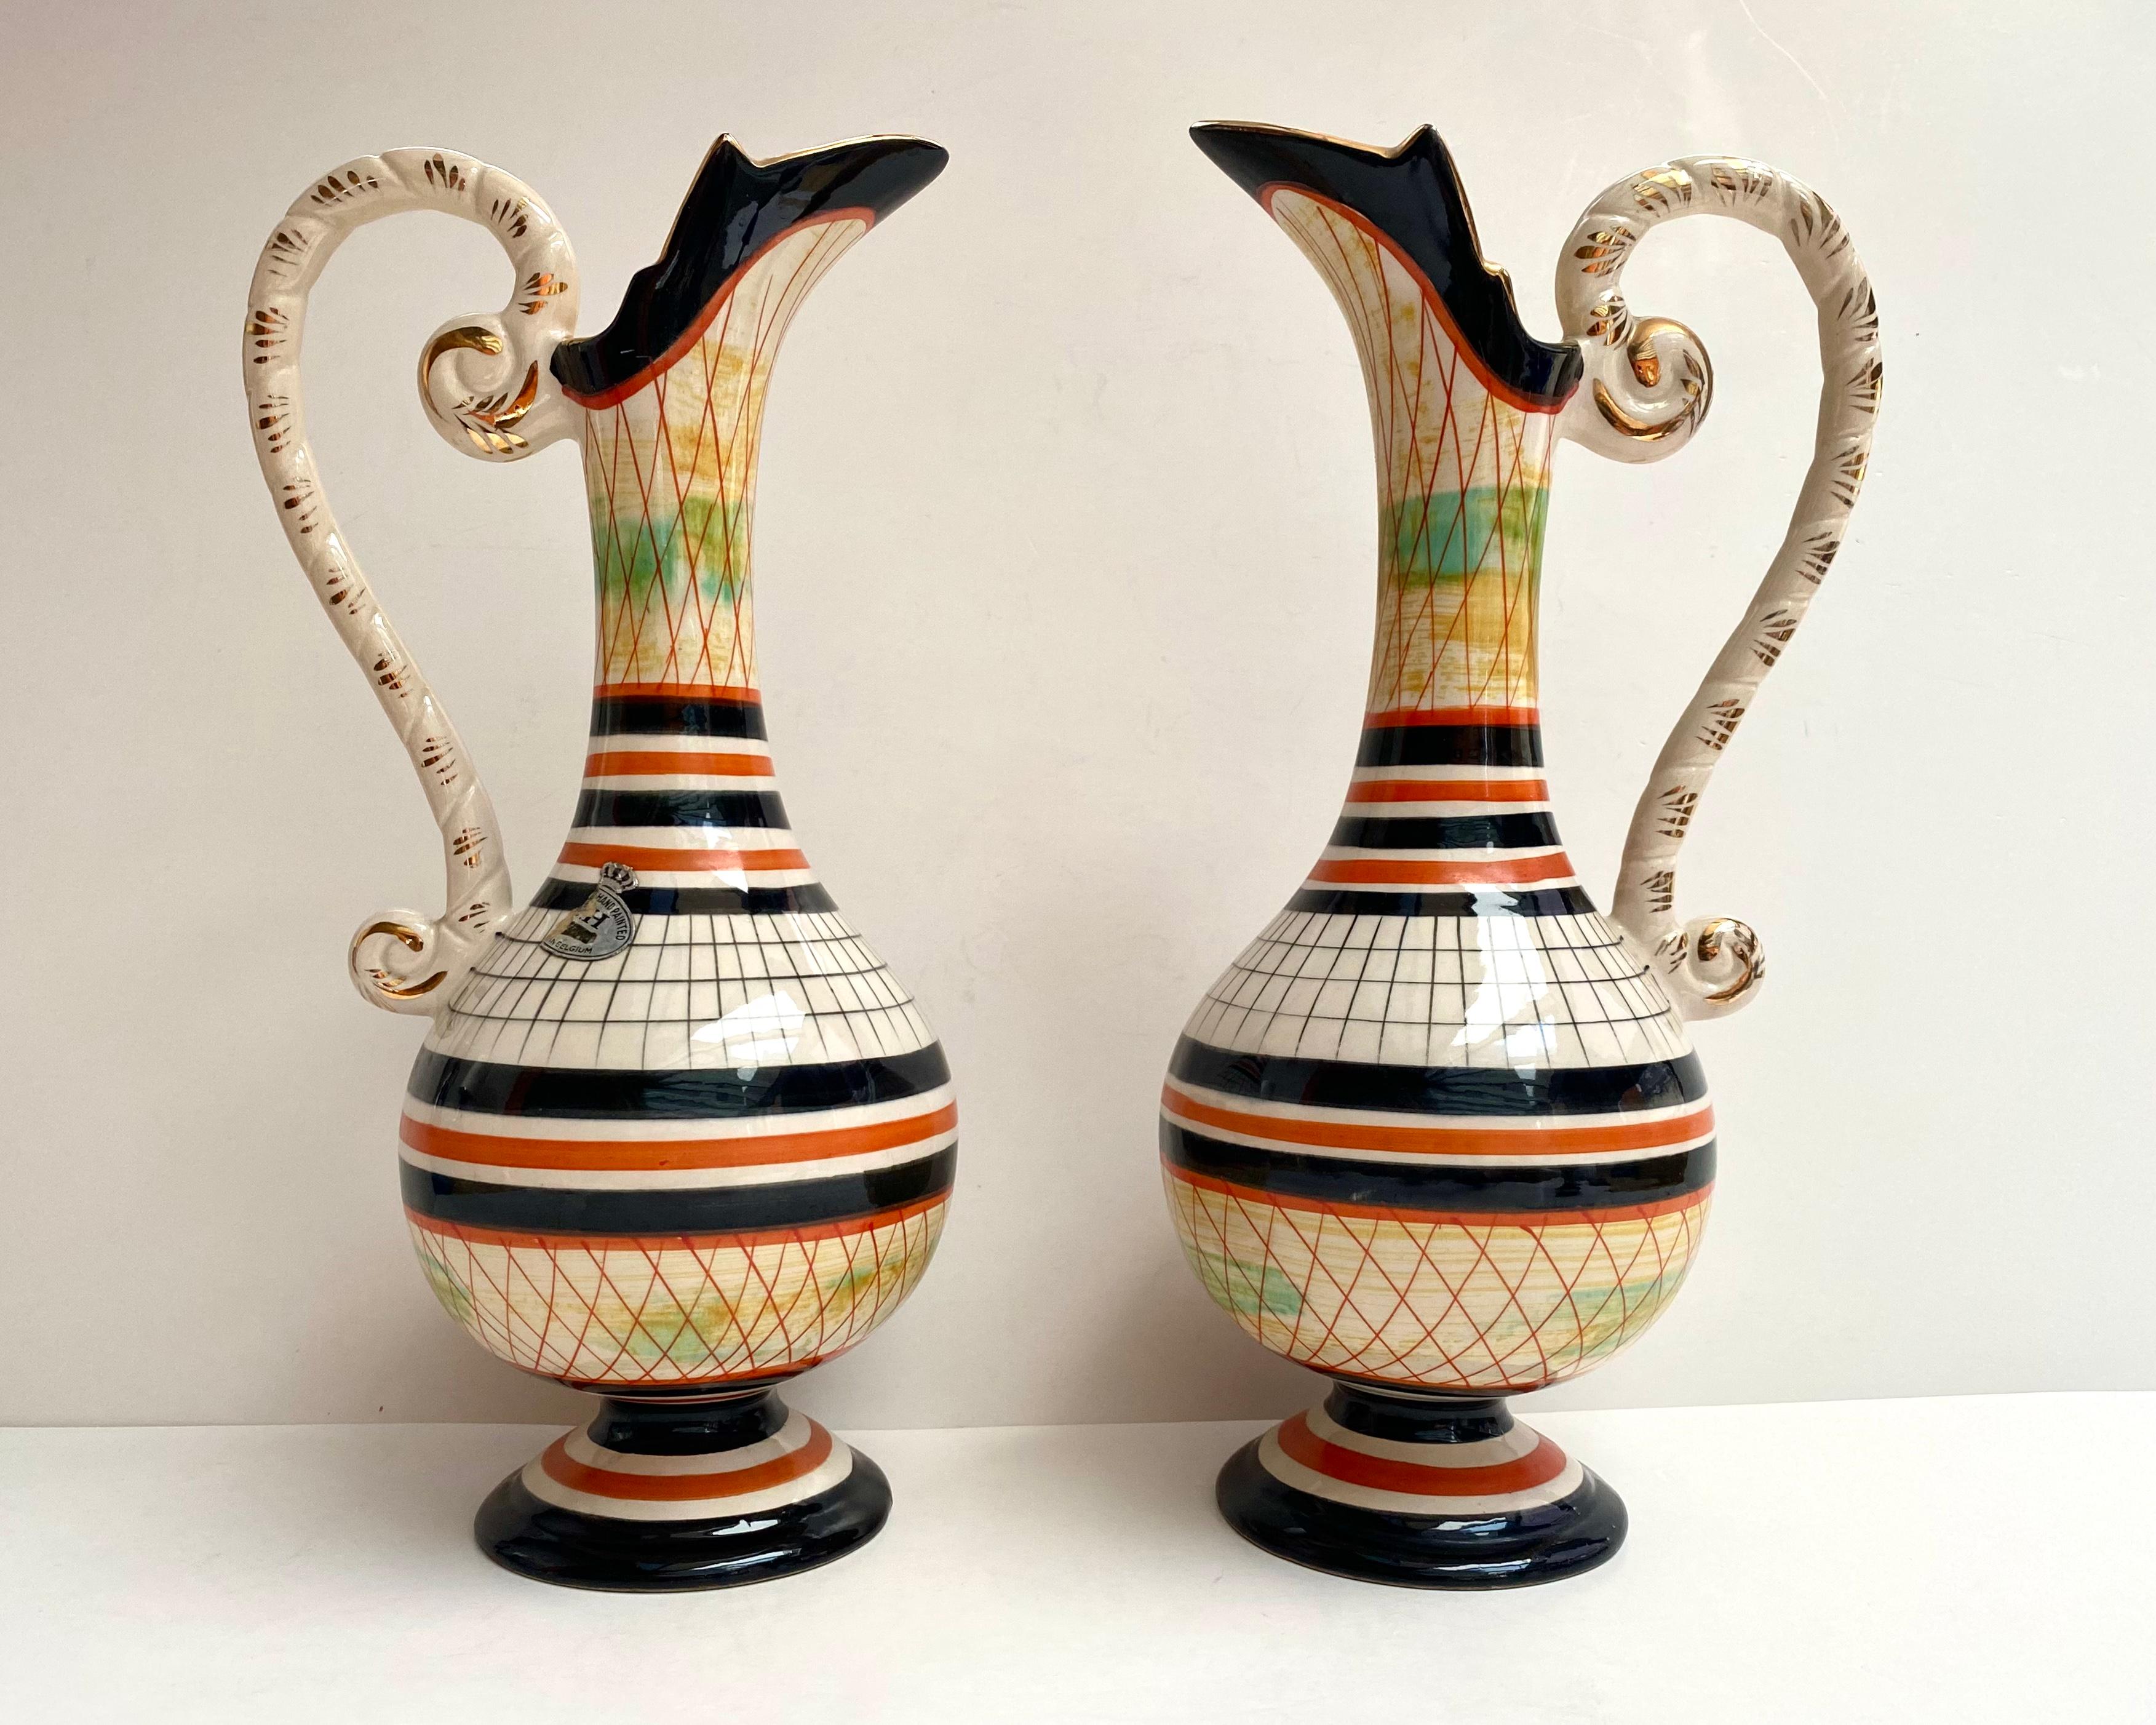 Very beautiful Art Deco ceramic vases/pitchers with handle. Set 2. Hubert Bequet. Belgium. 1970s.

Beautiful ceramic vase, hand-painted with geometric patterns and gilding from Quaregnon in Belgium, signed Hubert Bequet.

Marked 272 On the